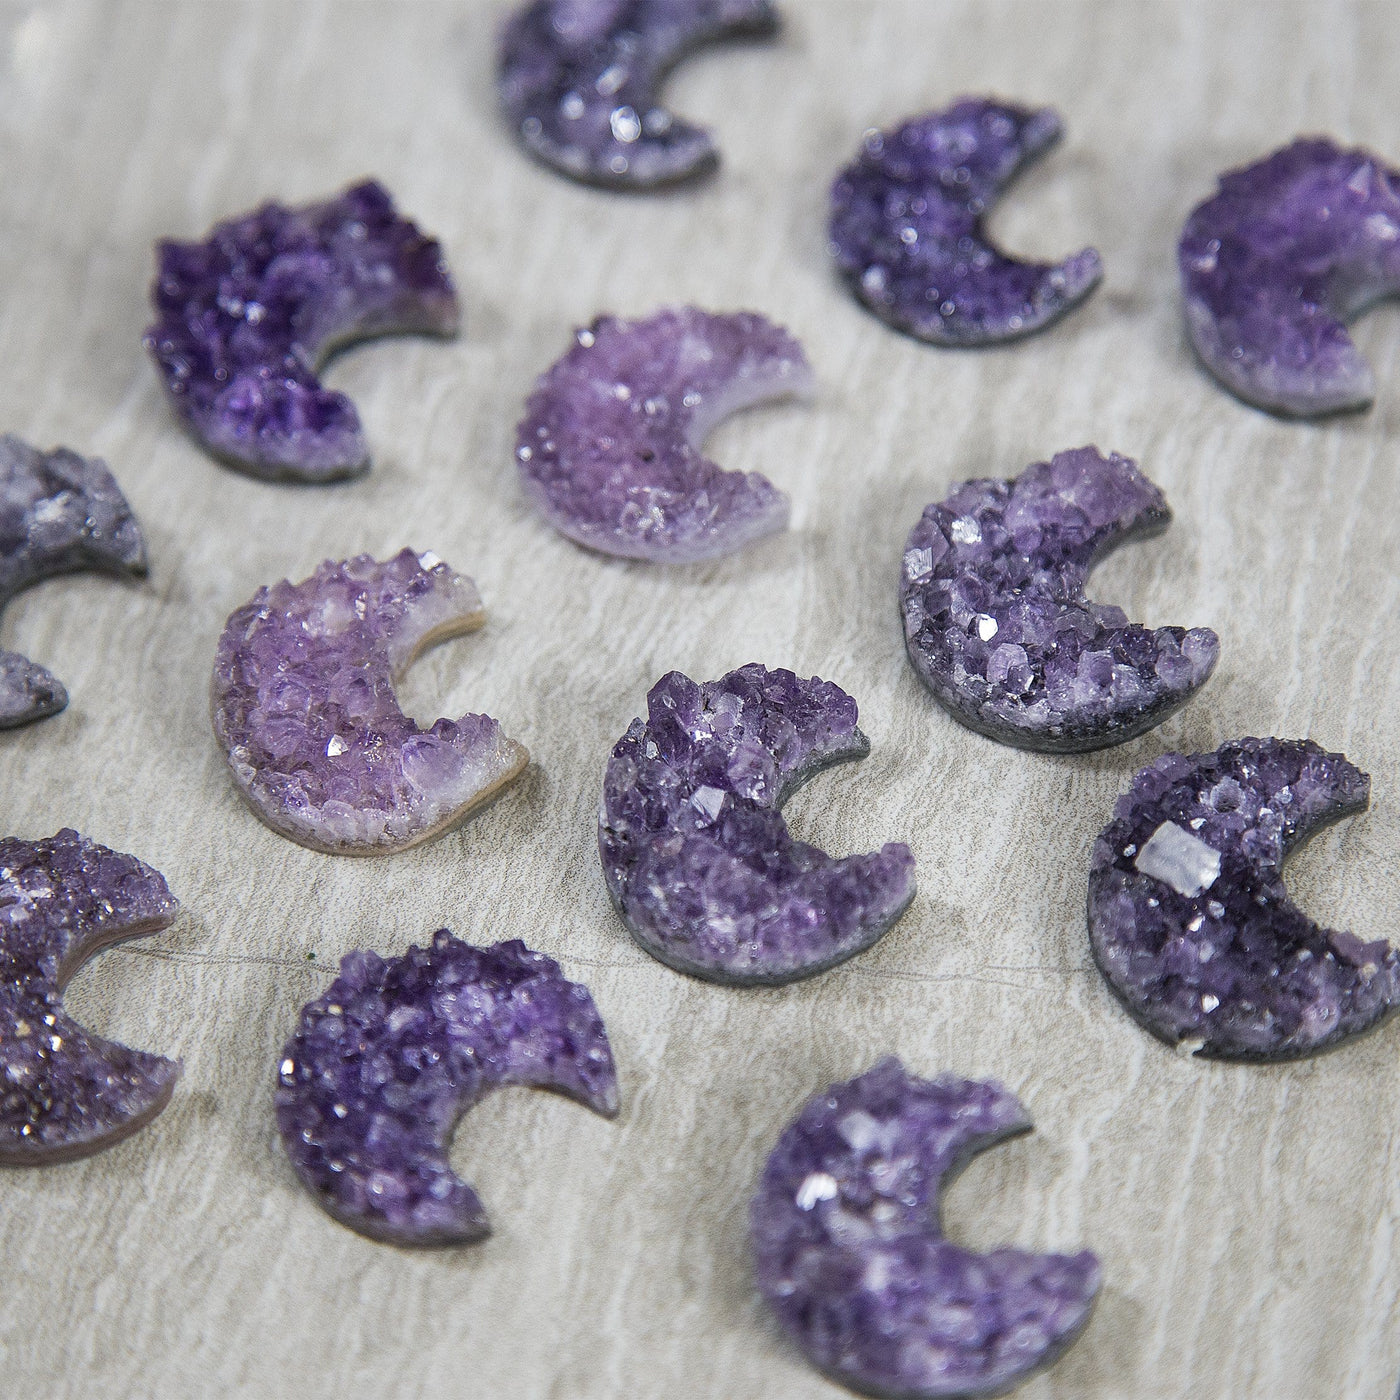 Amethyst cluster moons in assorted shades of purple to show how they vary.